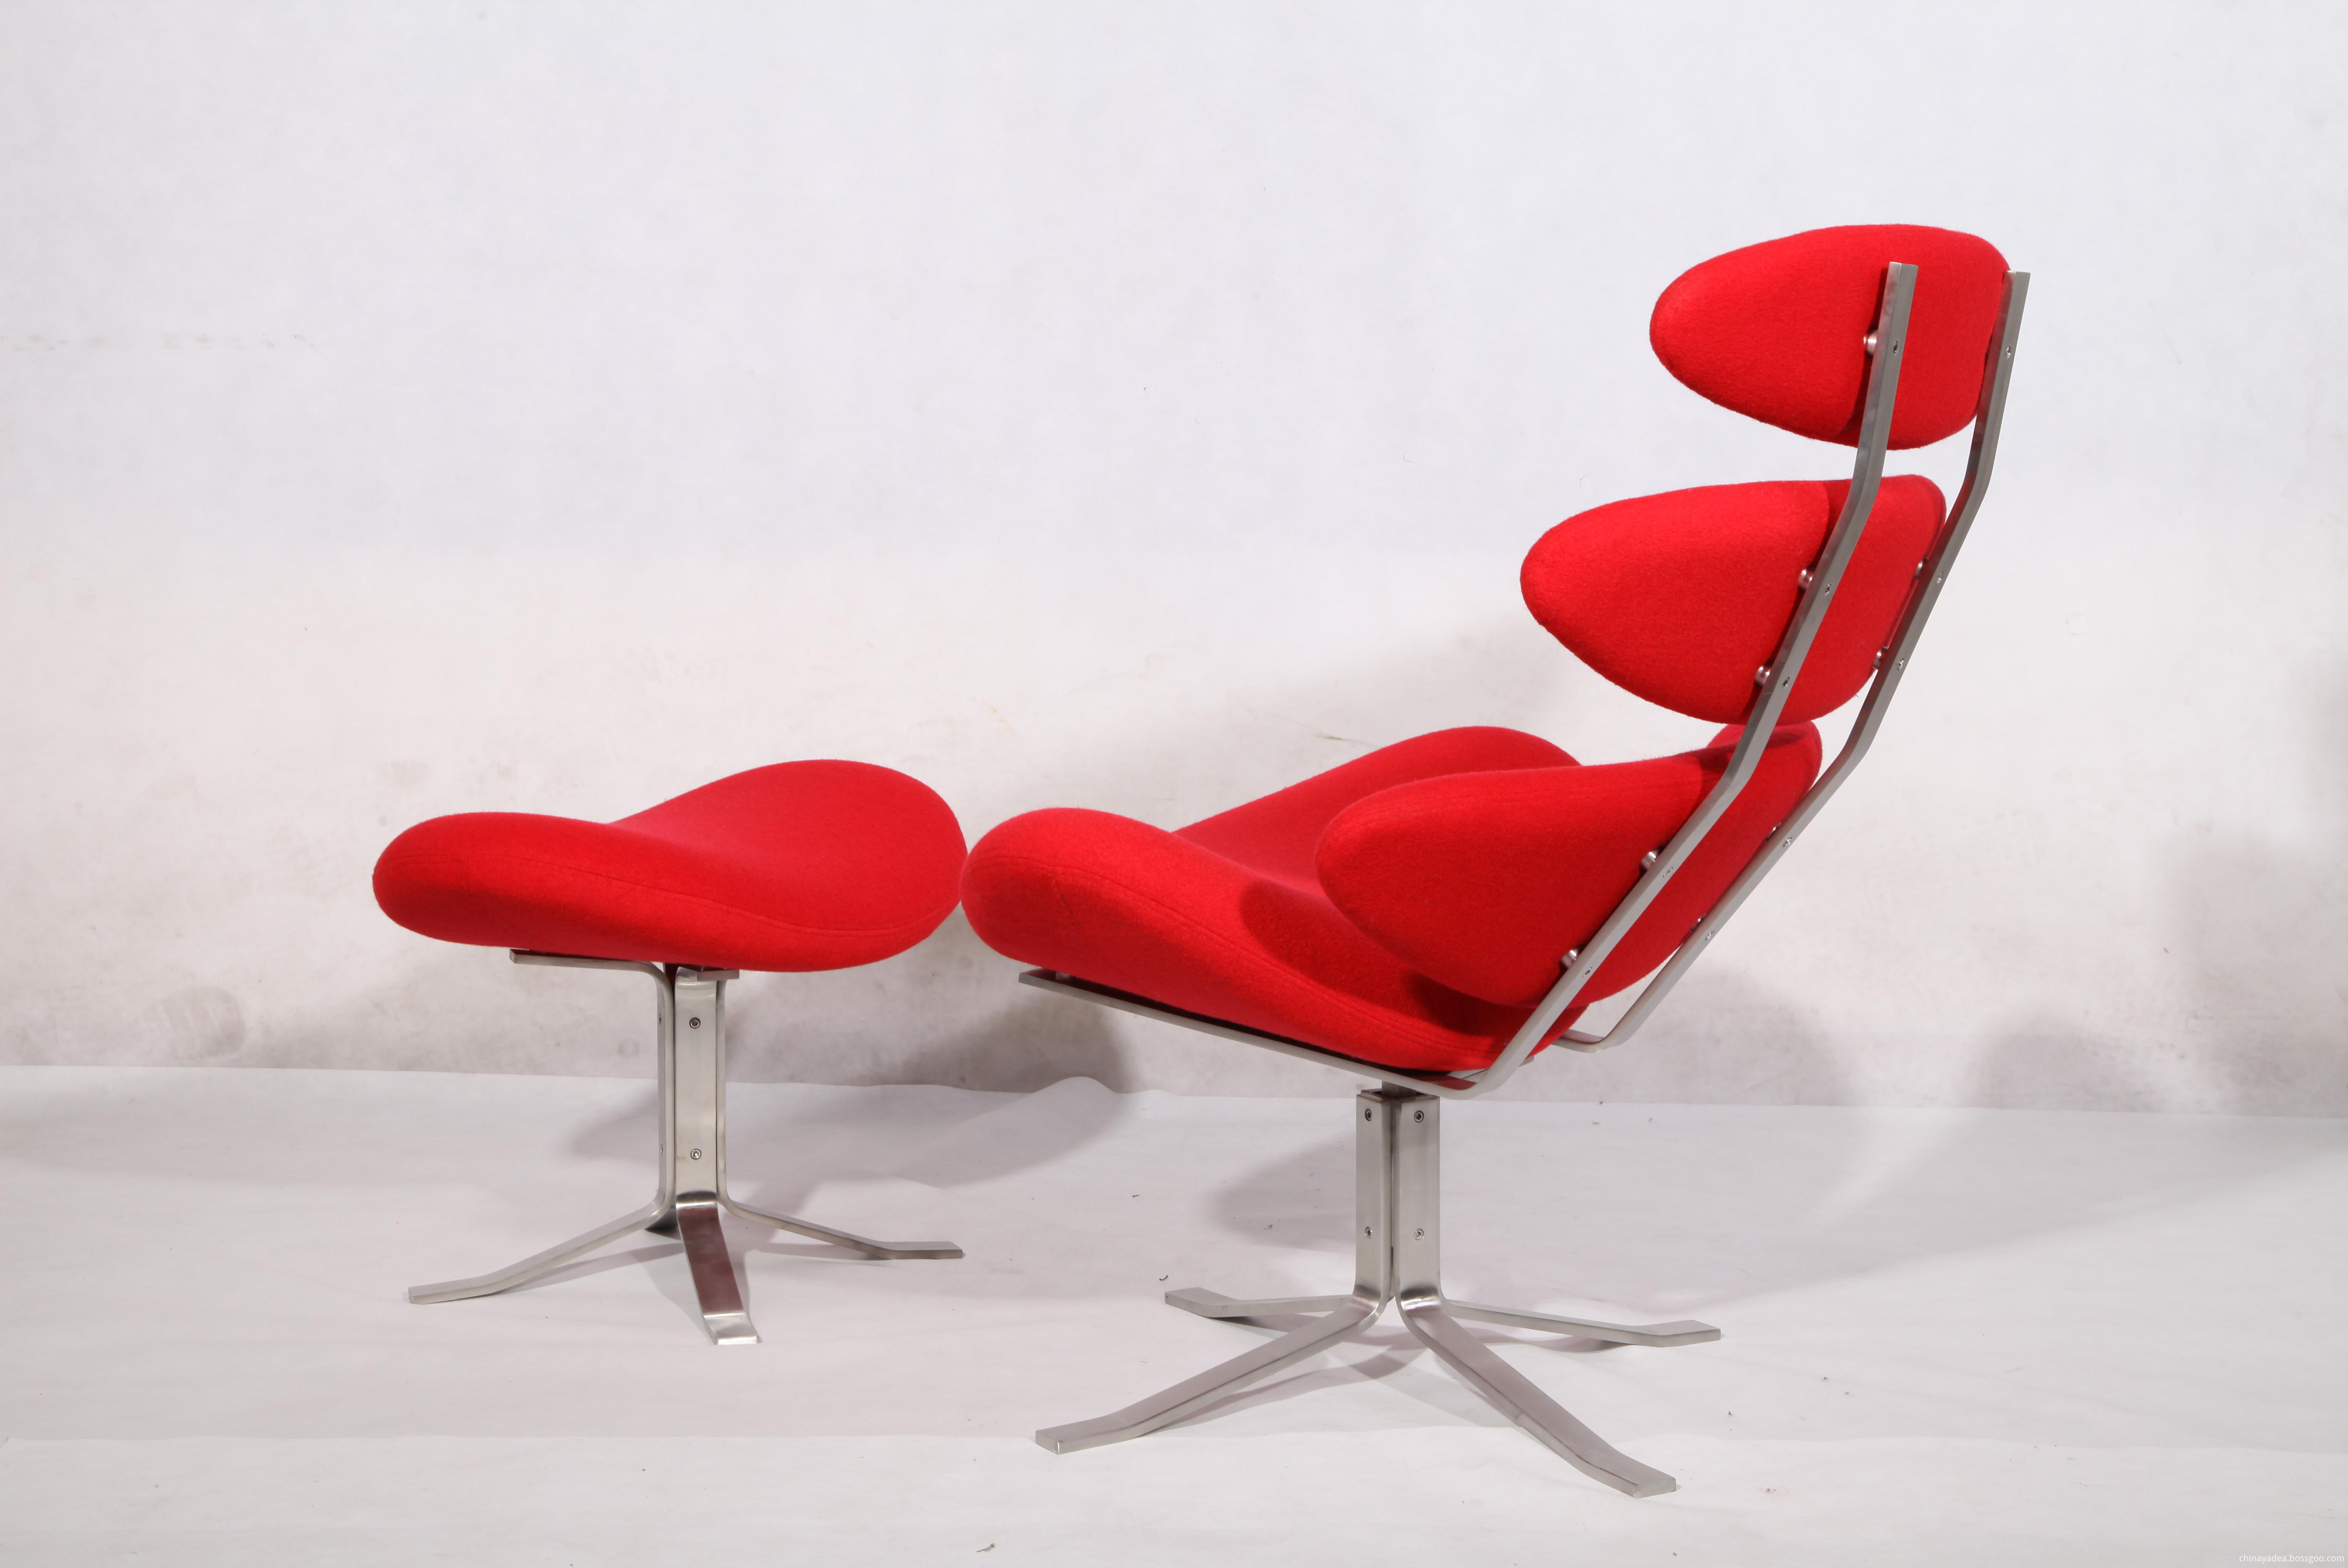 Poul Volther Corona chair